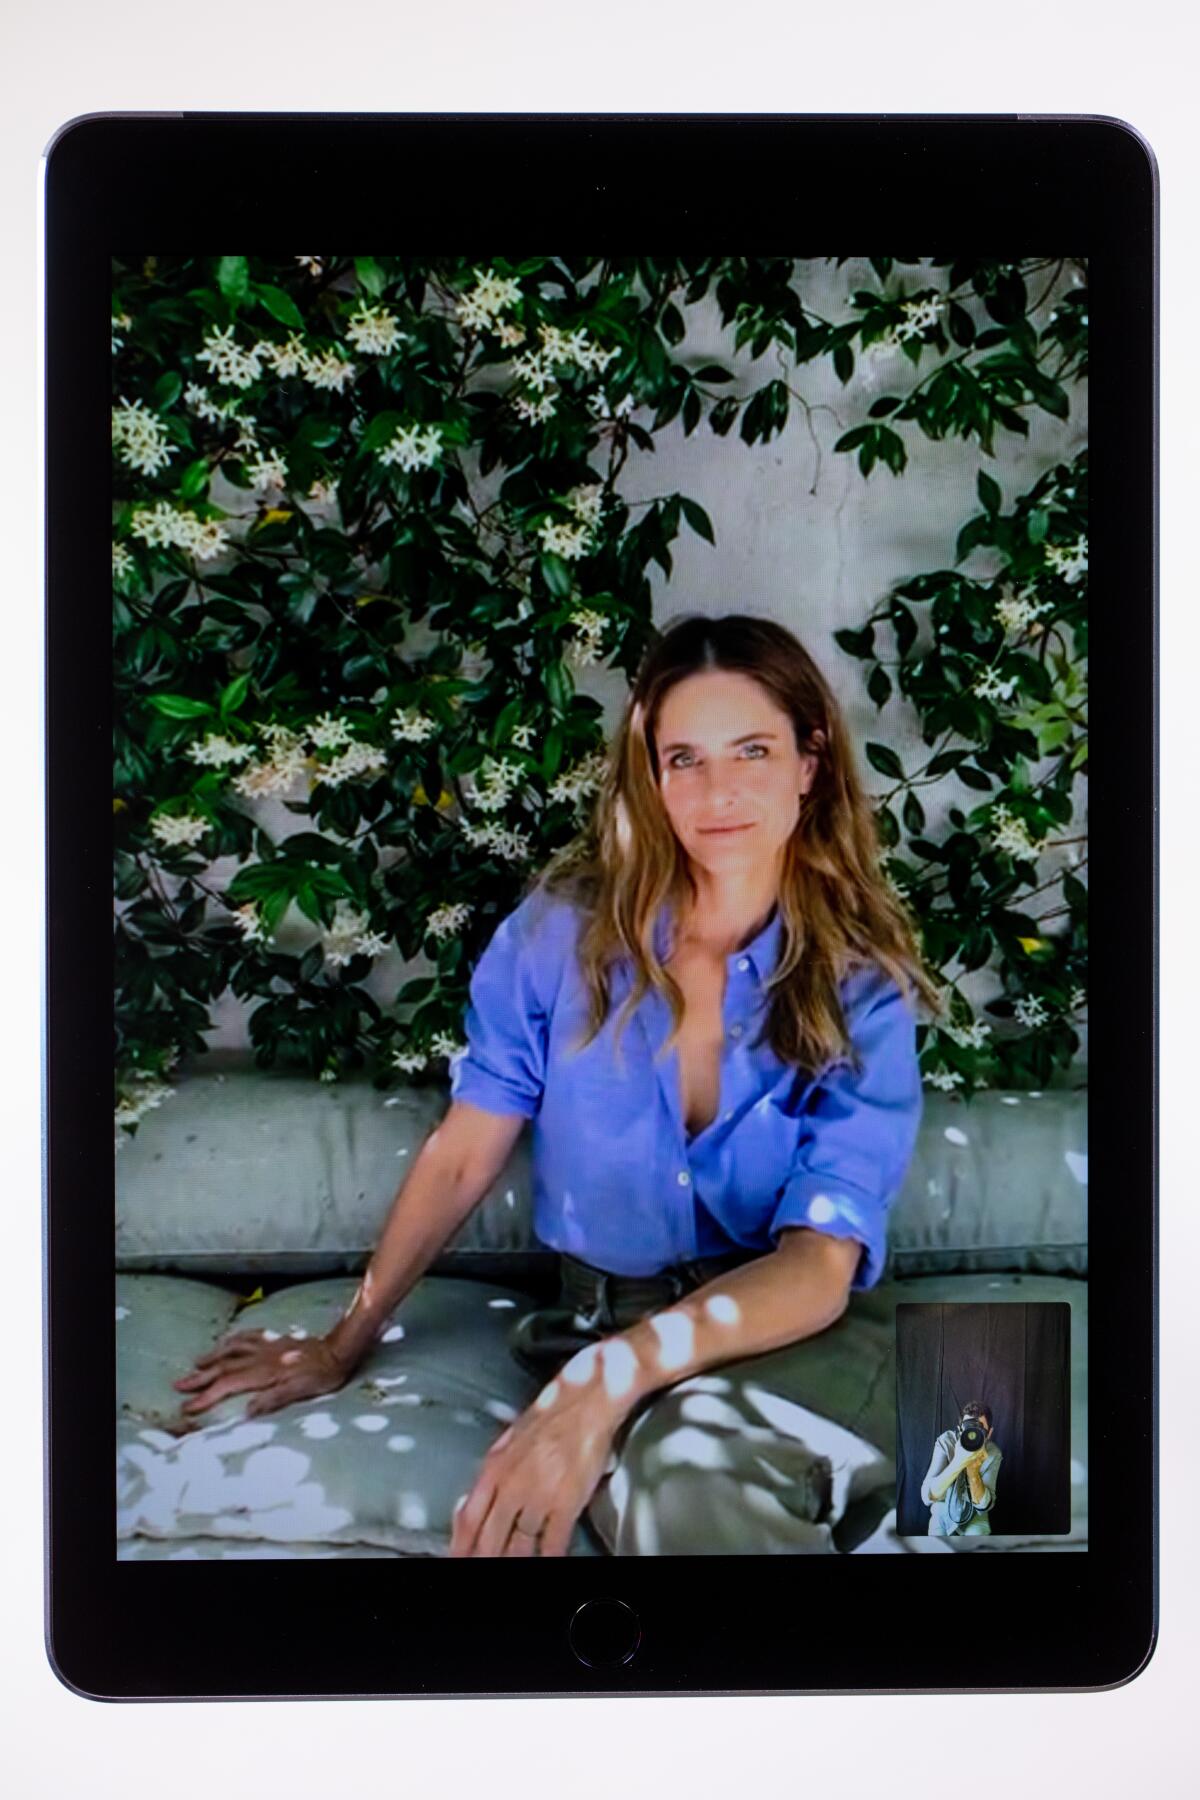 LOS ANGELES, CA - JUNE 11:  Amanda Peet is photographed on an iPad with photographer Jay L. Clendenin from her home. 